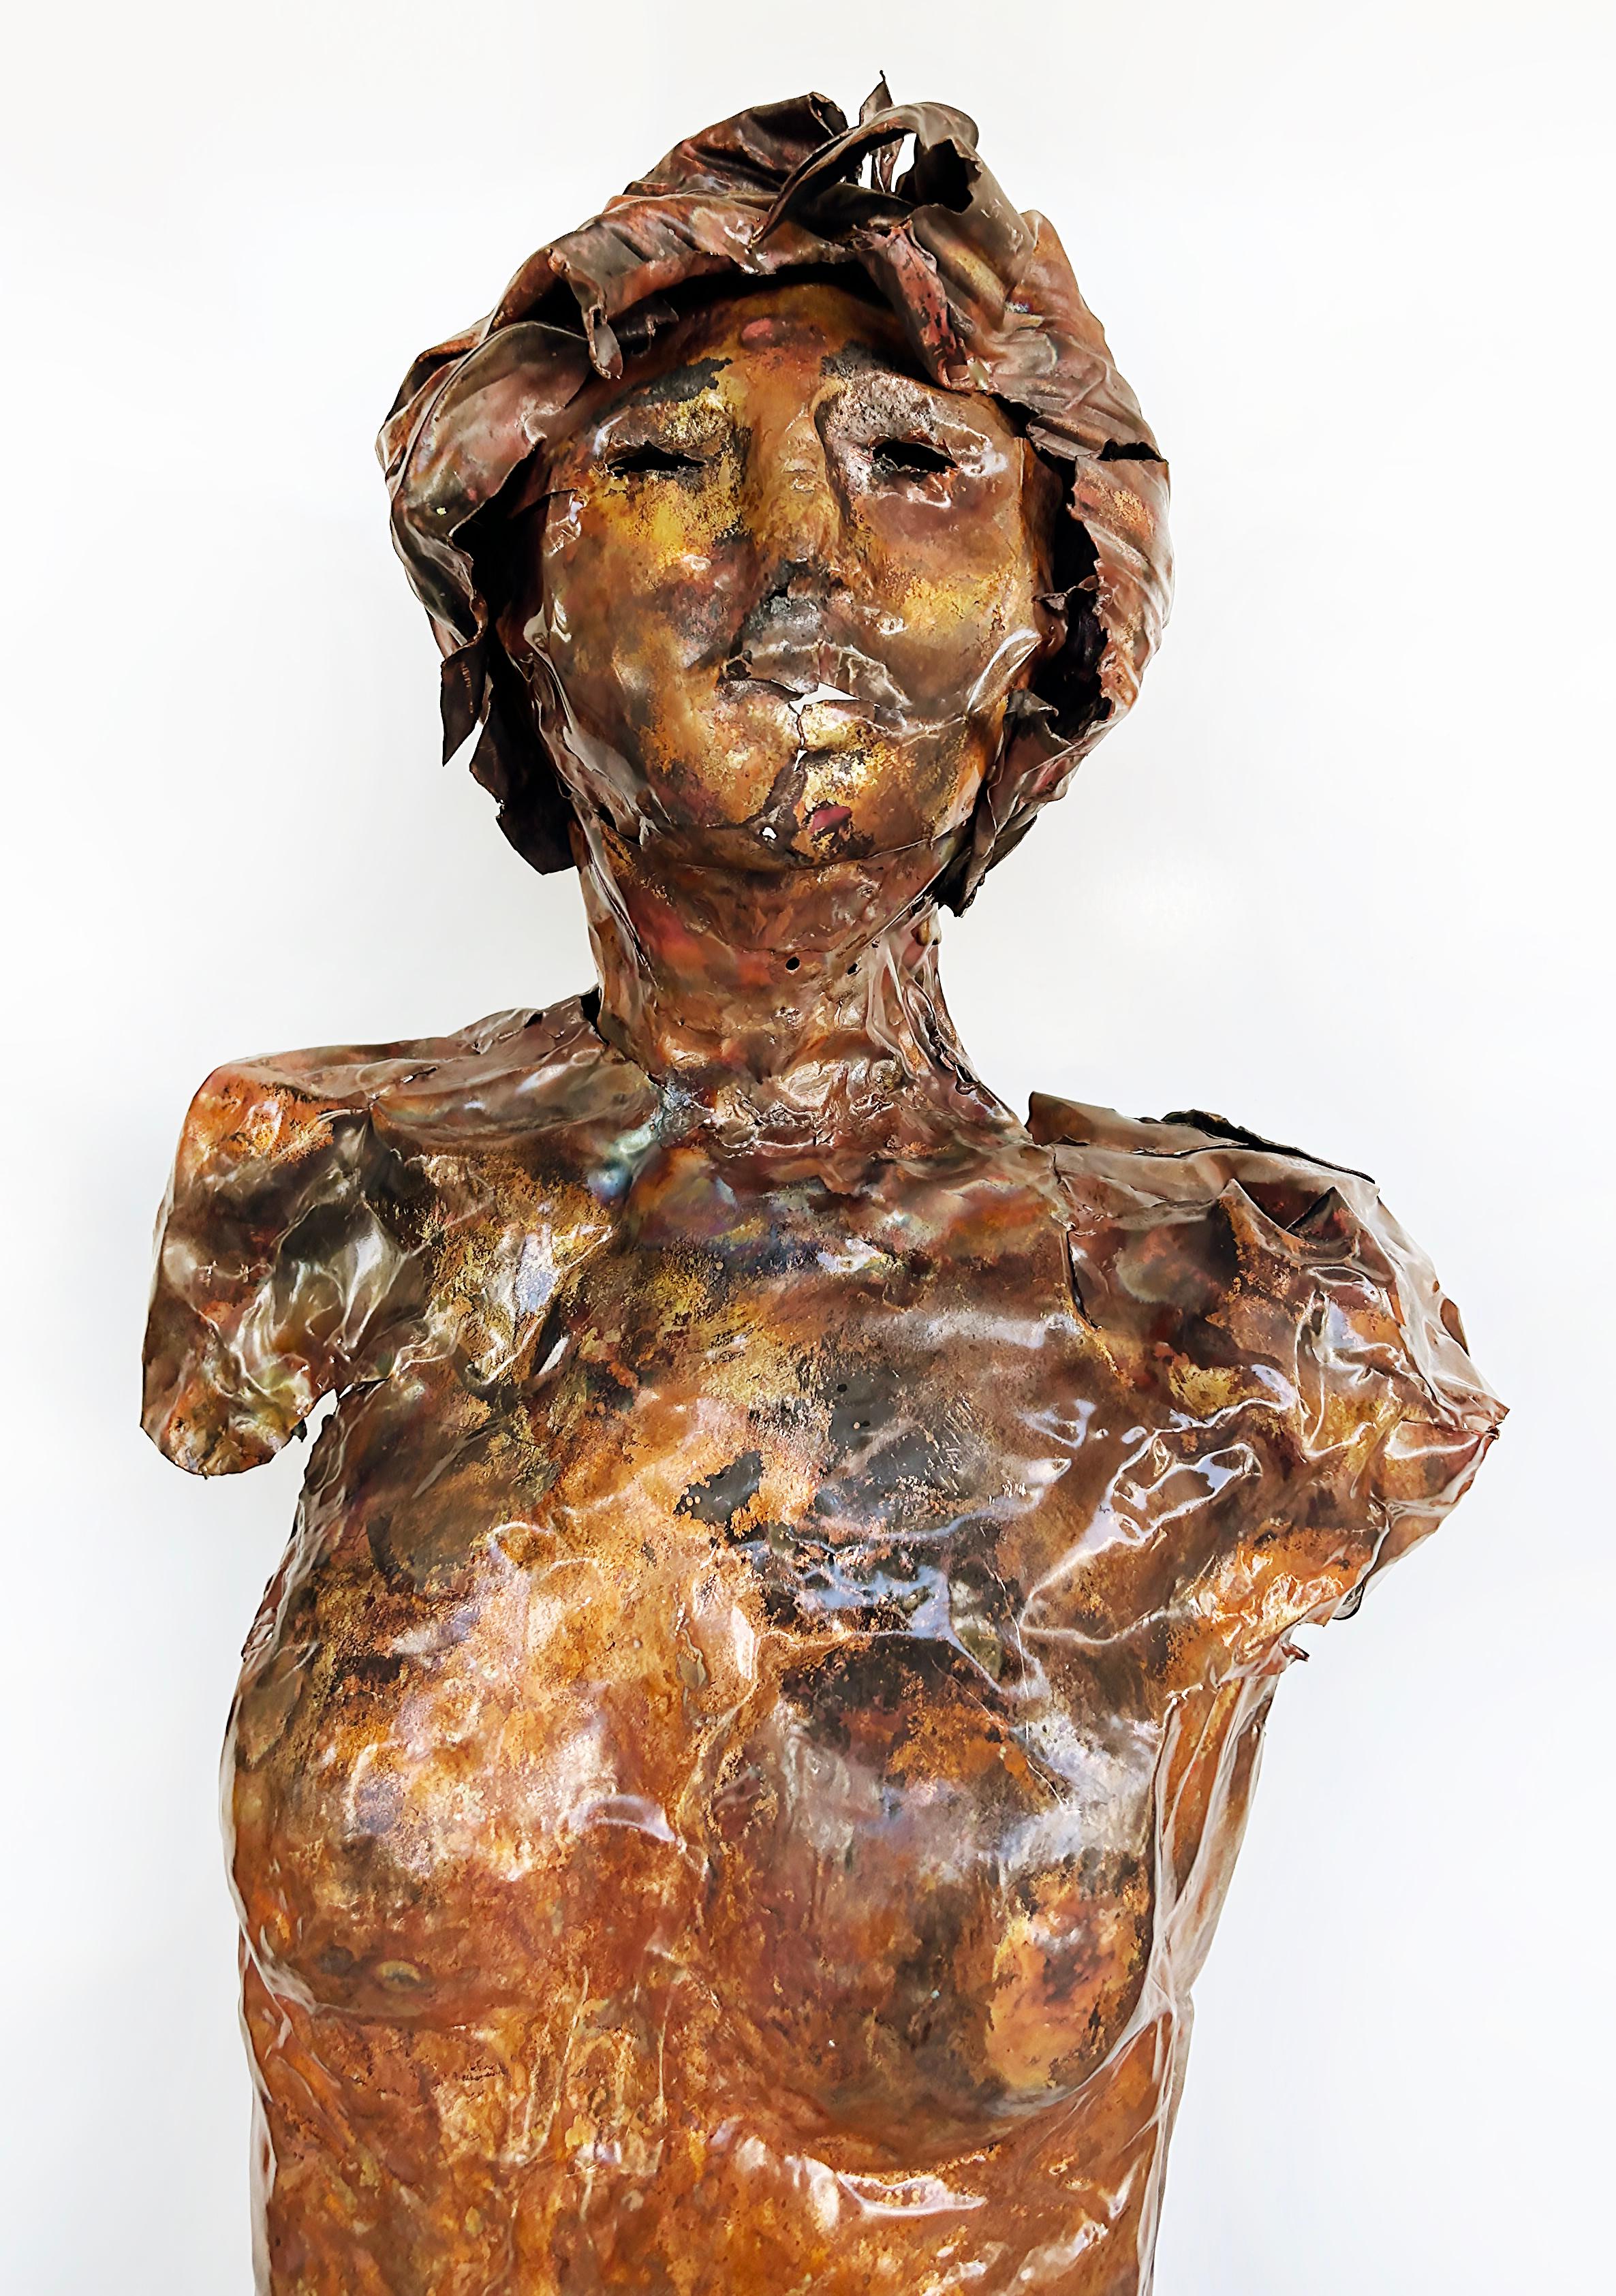 Life-Size Figurative Copper Statue Sculpture by Davis Murphy

Offered for sale is a striking life-size figurative copper sculpture of a female figure by Davis Murphy. This hand-made sculpture is presented on a rustic wood board and her male